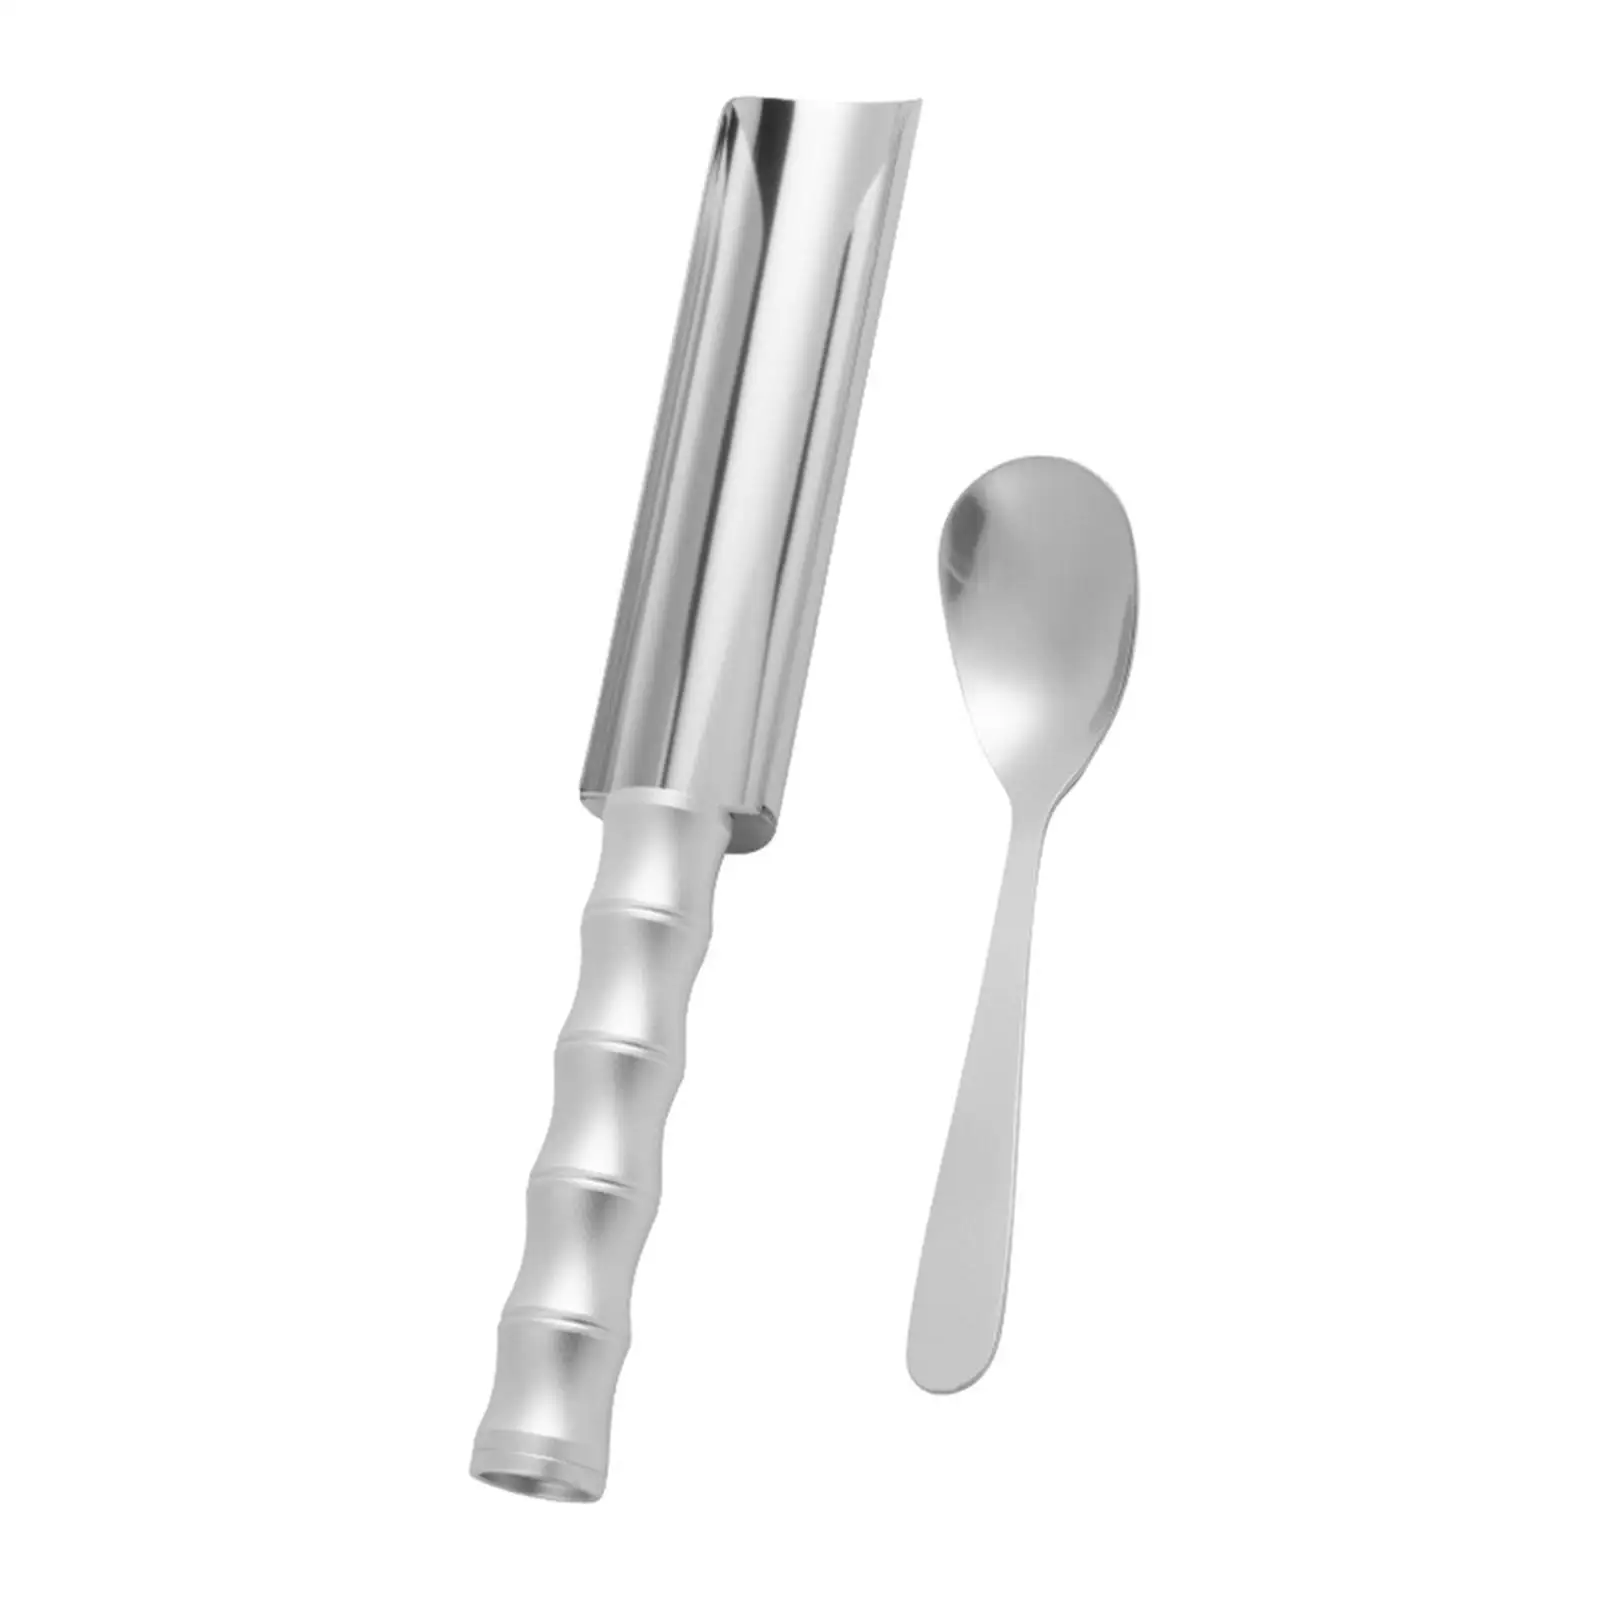 DIY Meatball Making Comfortable Grip Meatball Shaper Kitchen Meatball Maker Meat Baller Spoon with Spade for Beef Meat Ball